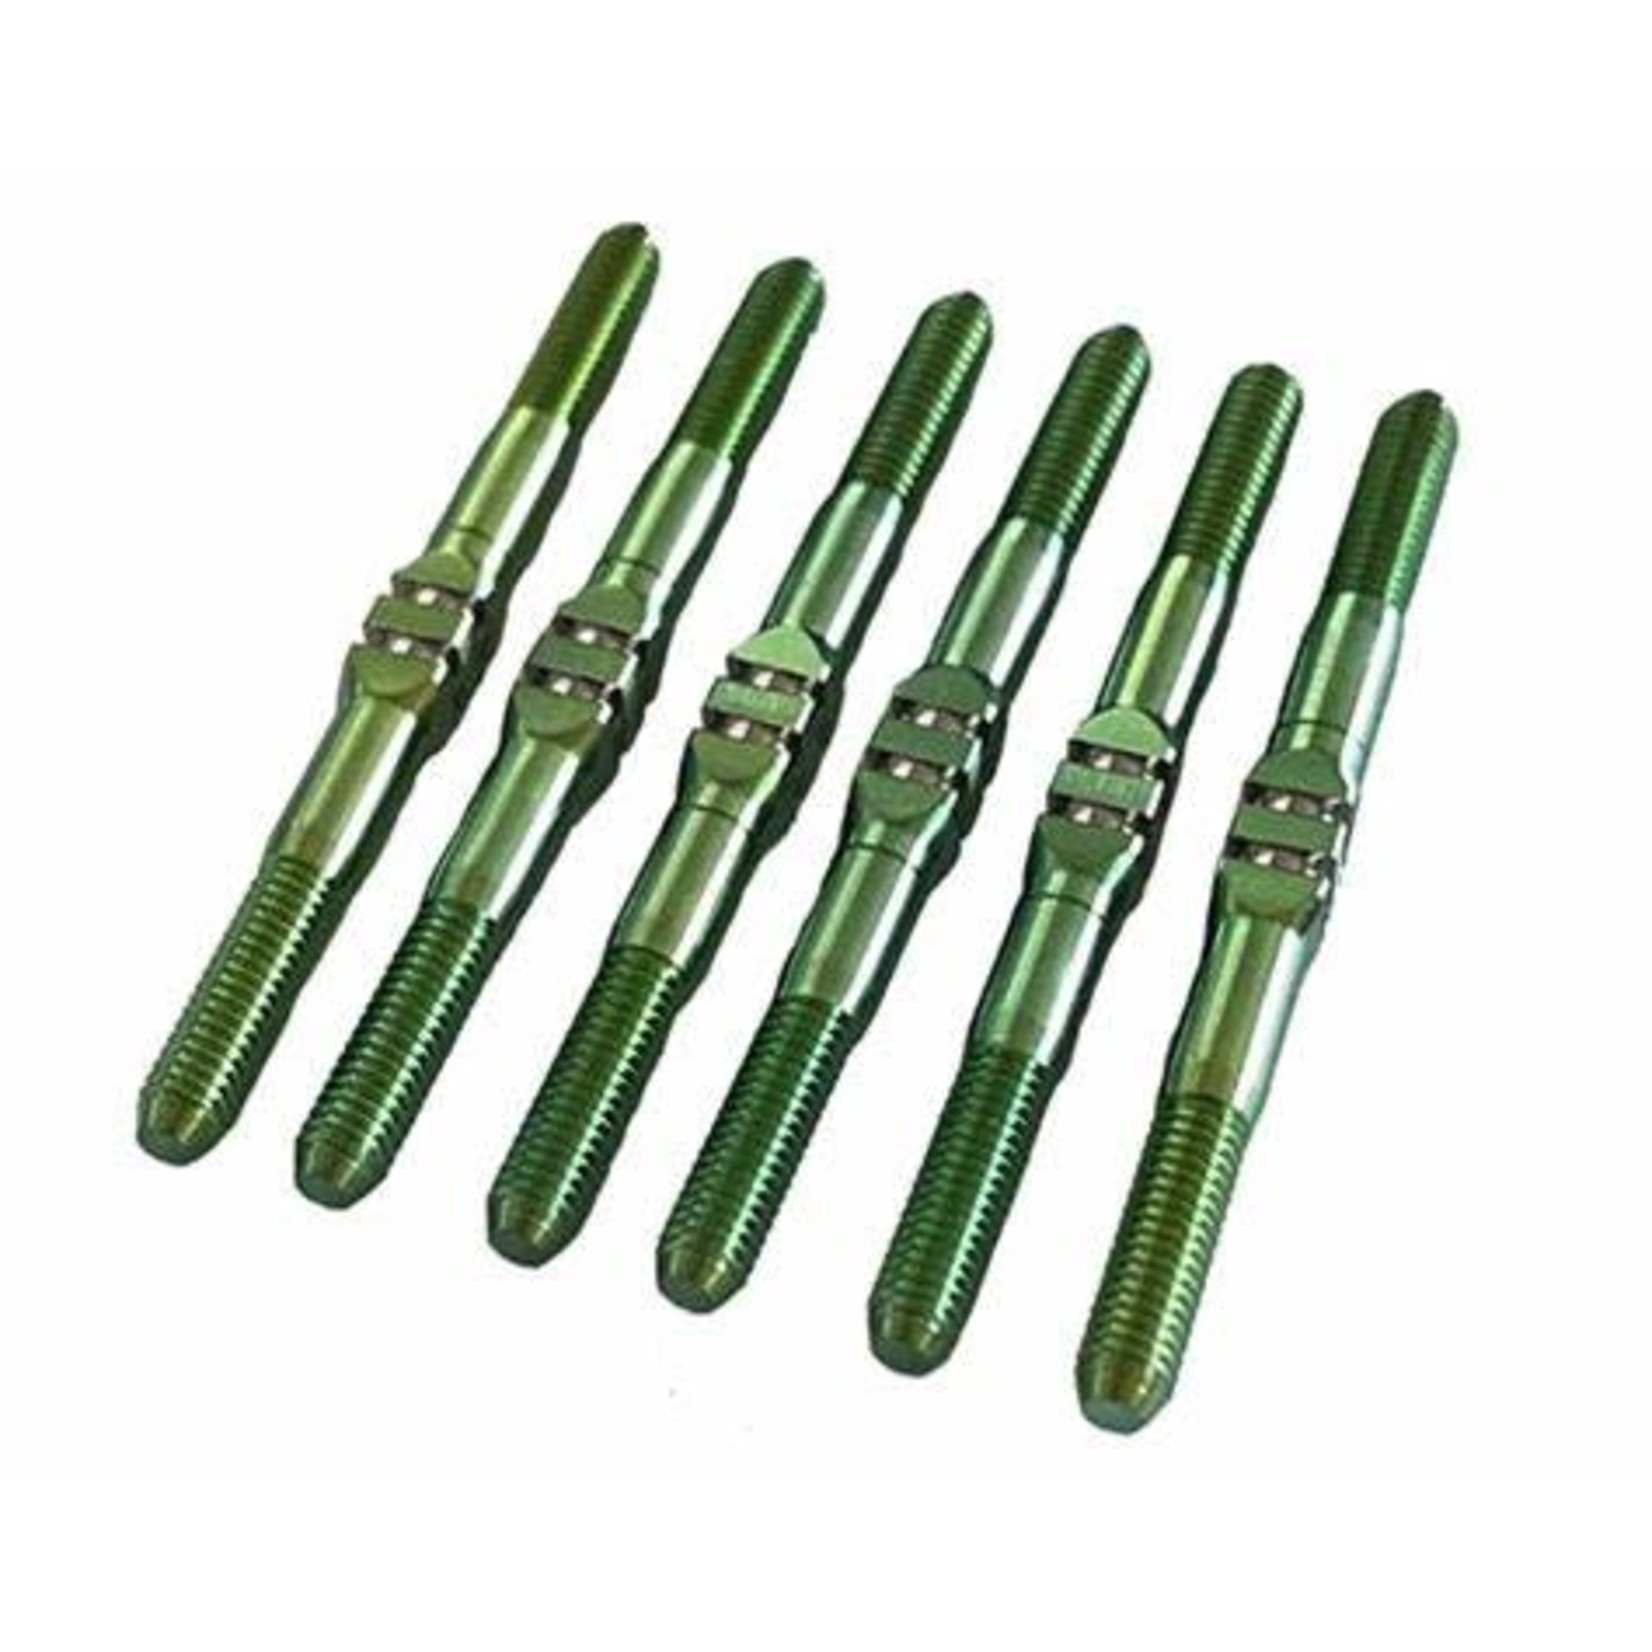 Whitz Racing Products HyperMax TLR 22X-4 3.5mm Titanium Turnbuckle Kit (Green)